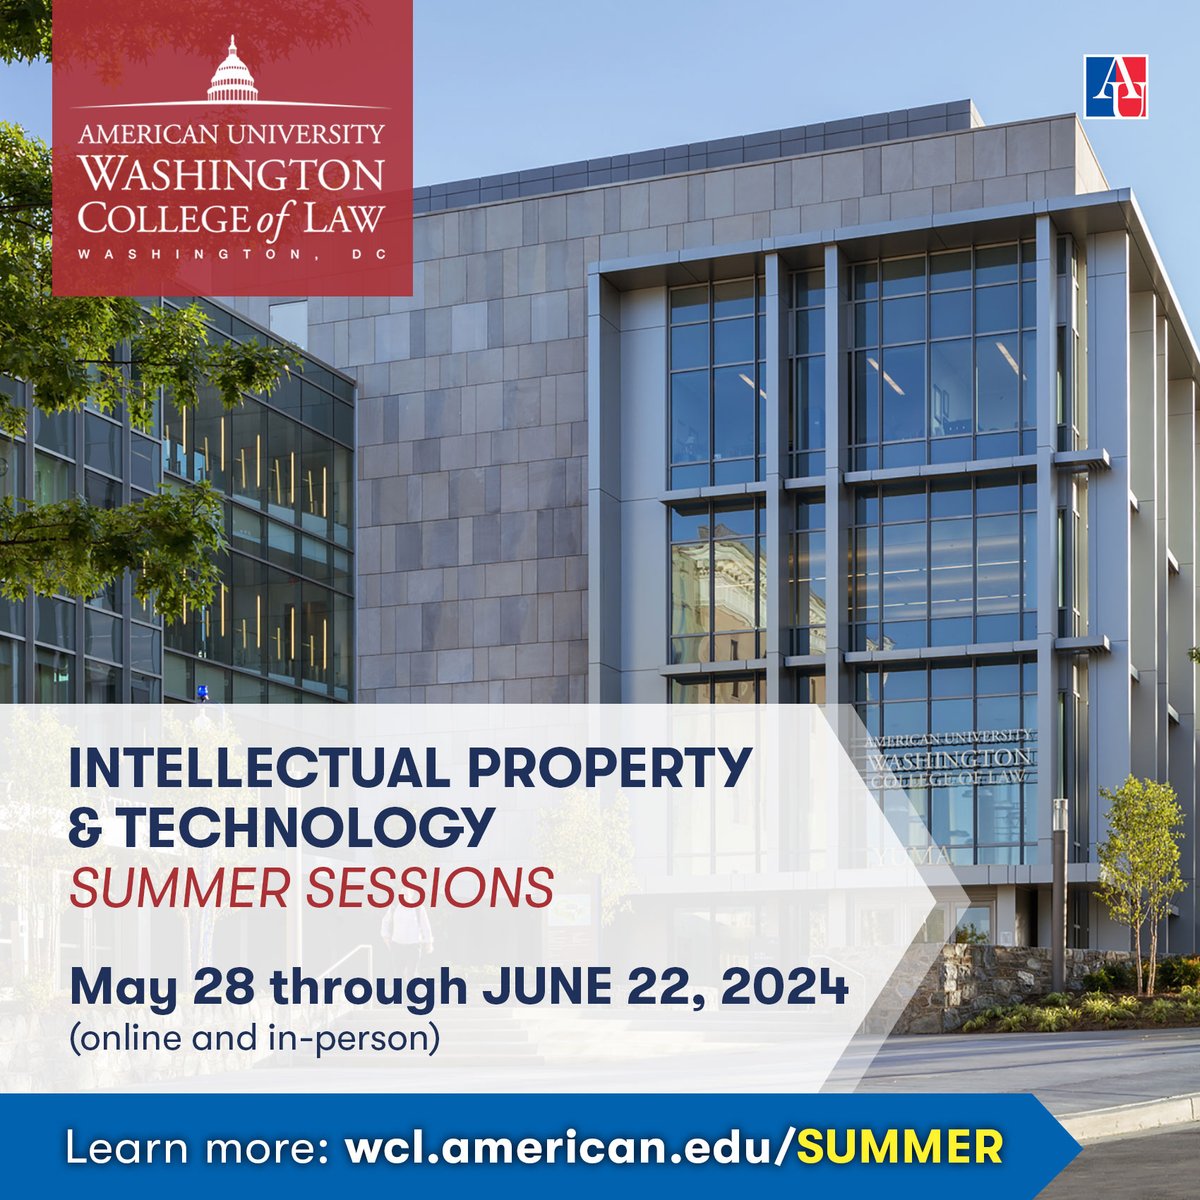 Attention law students! Register for our practitioner-taught summer courses on Music Licensing and/or Video Game & Immersive Tech Law. Both courses are open to practitioners for CLE. For more info & to register ow.ly/6Ry850RsOvB